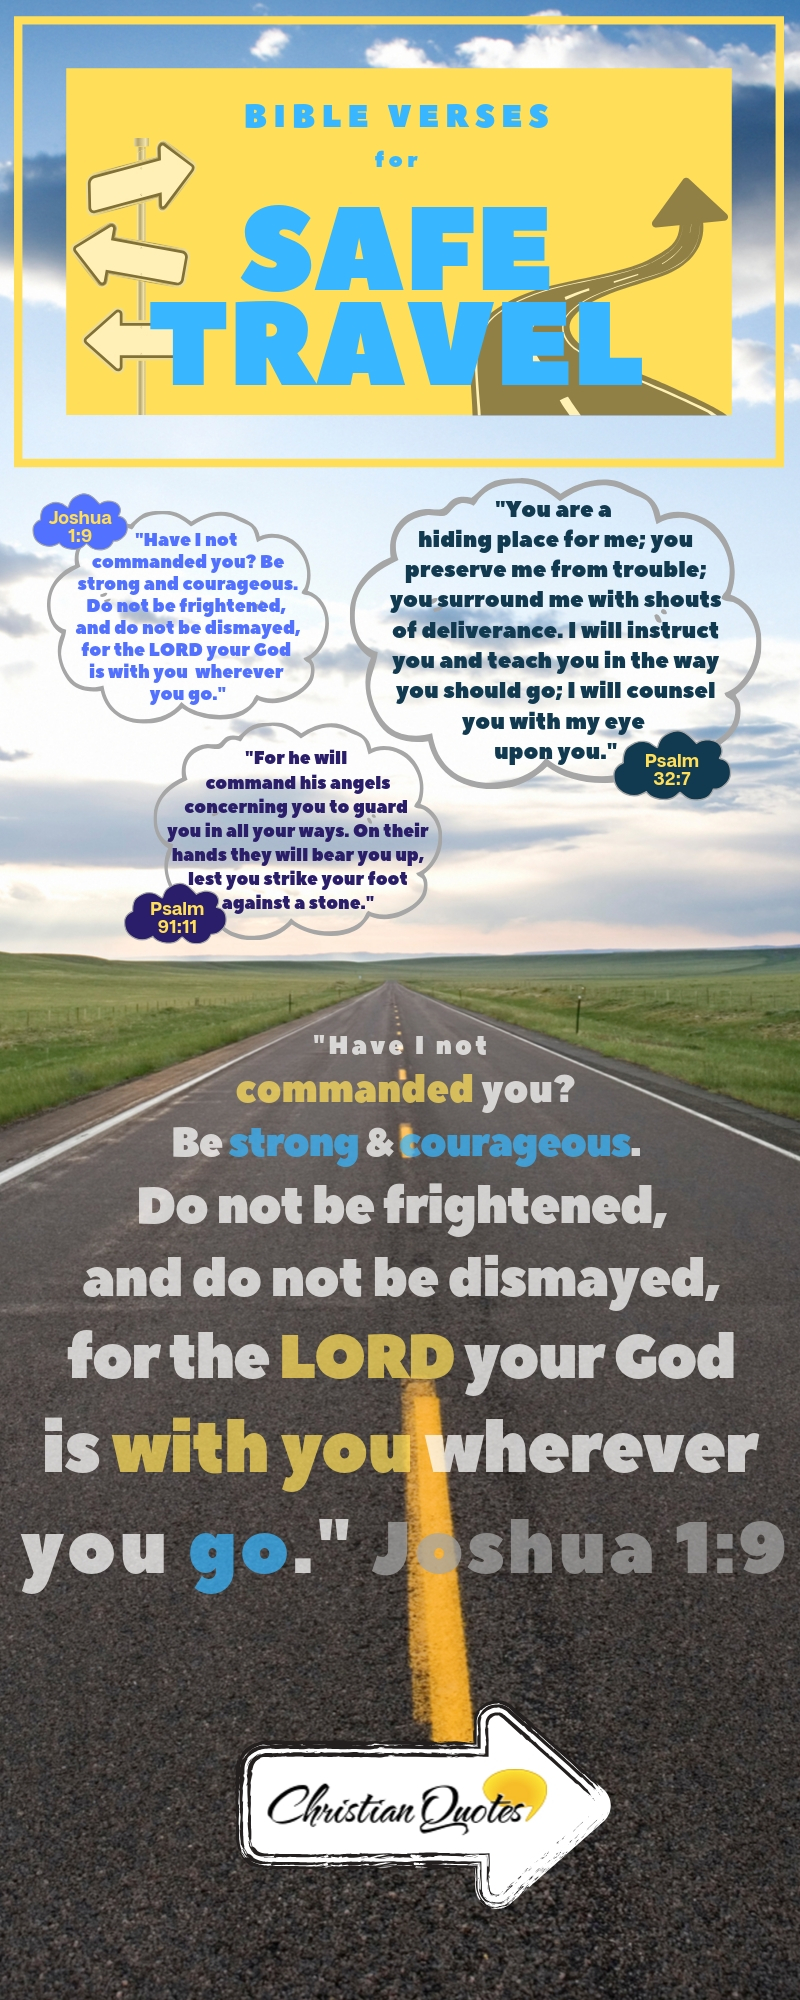 bible verses about safe travel infographic